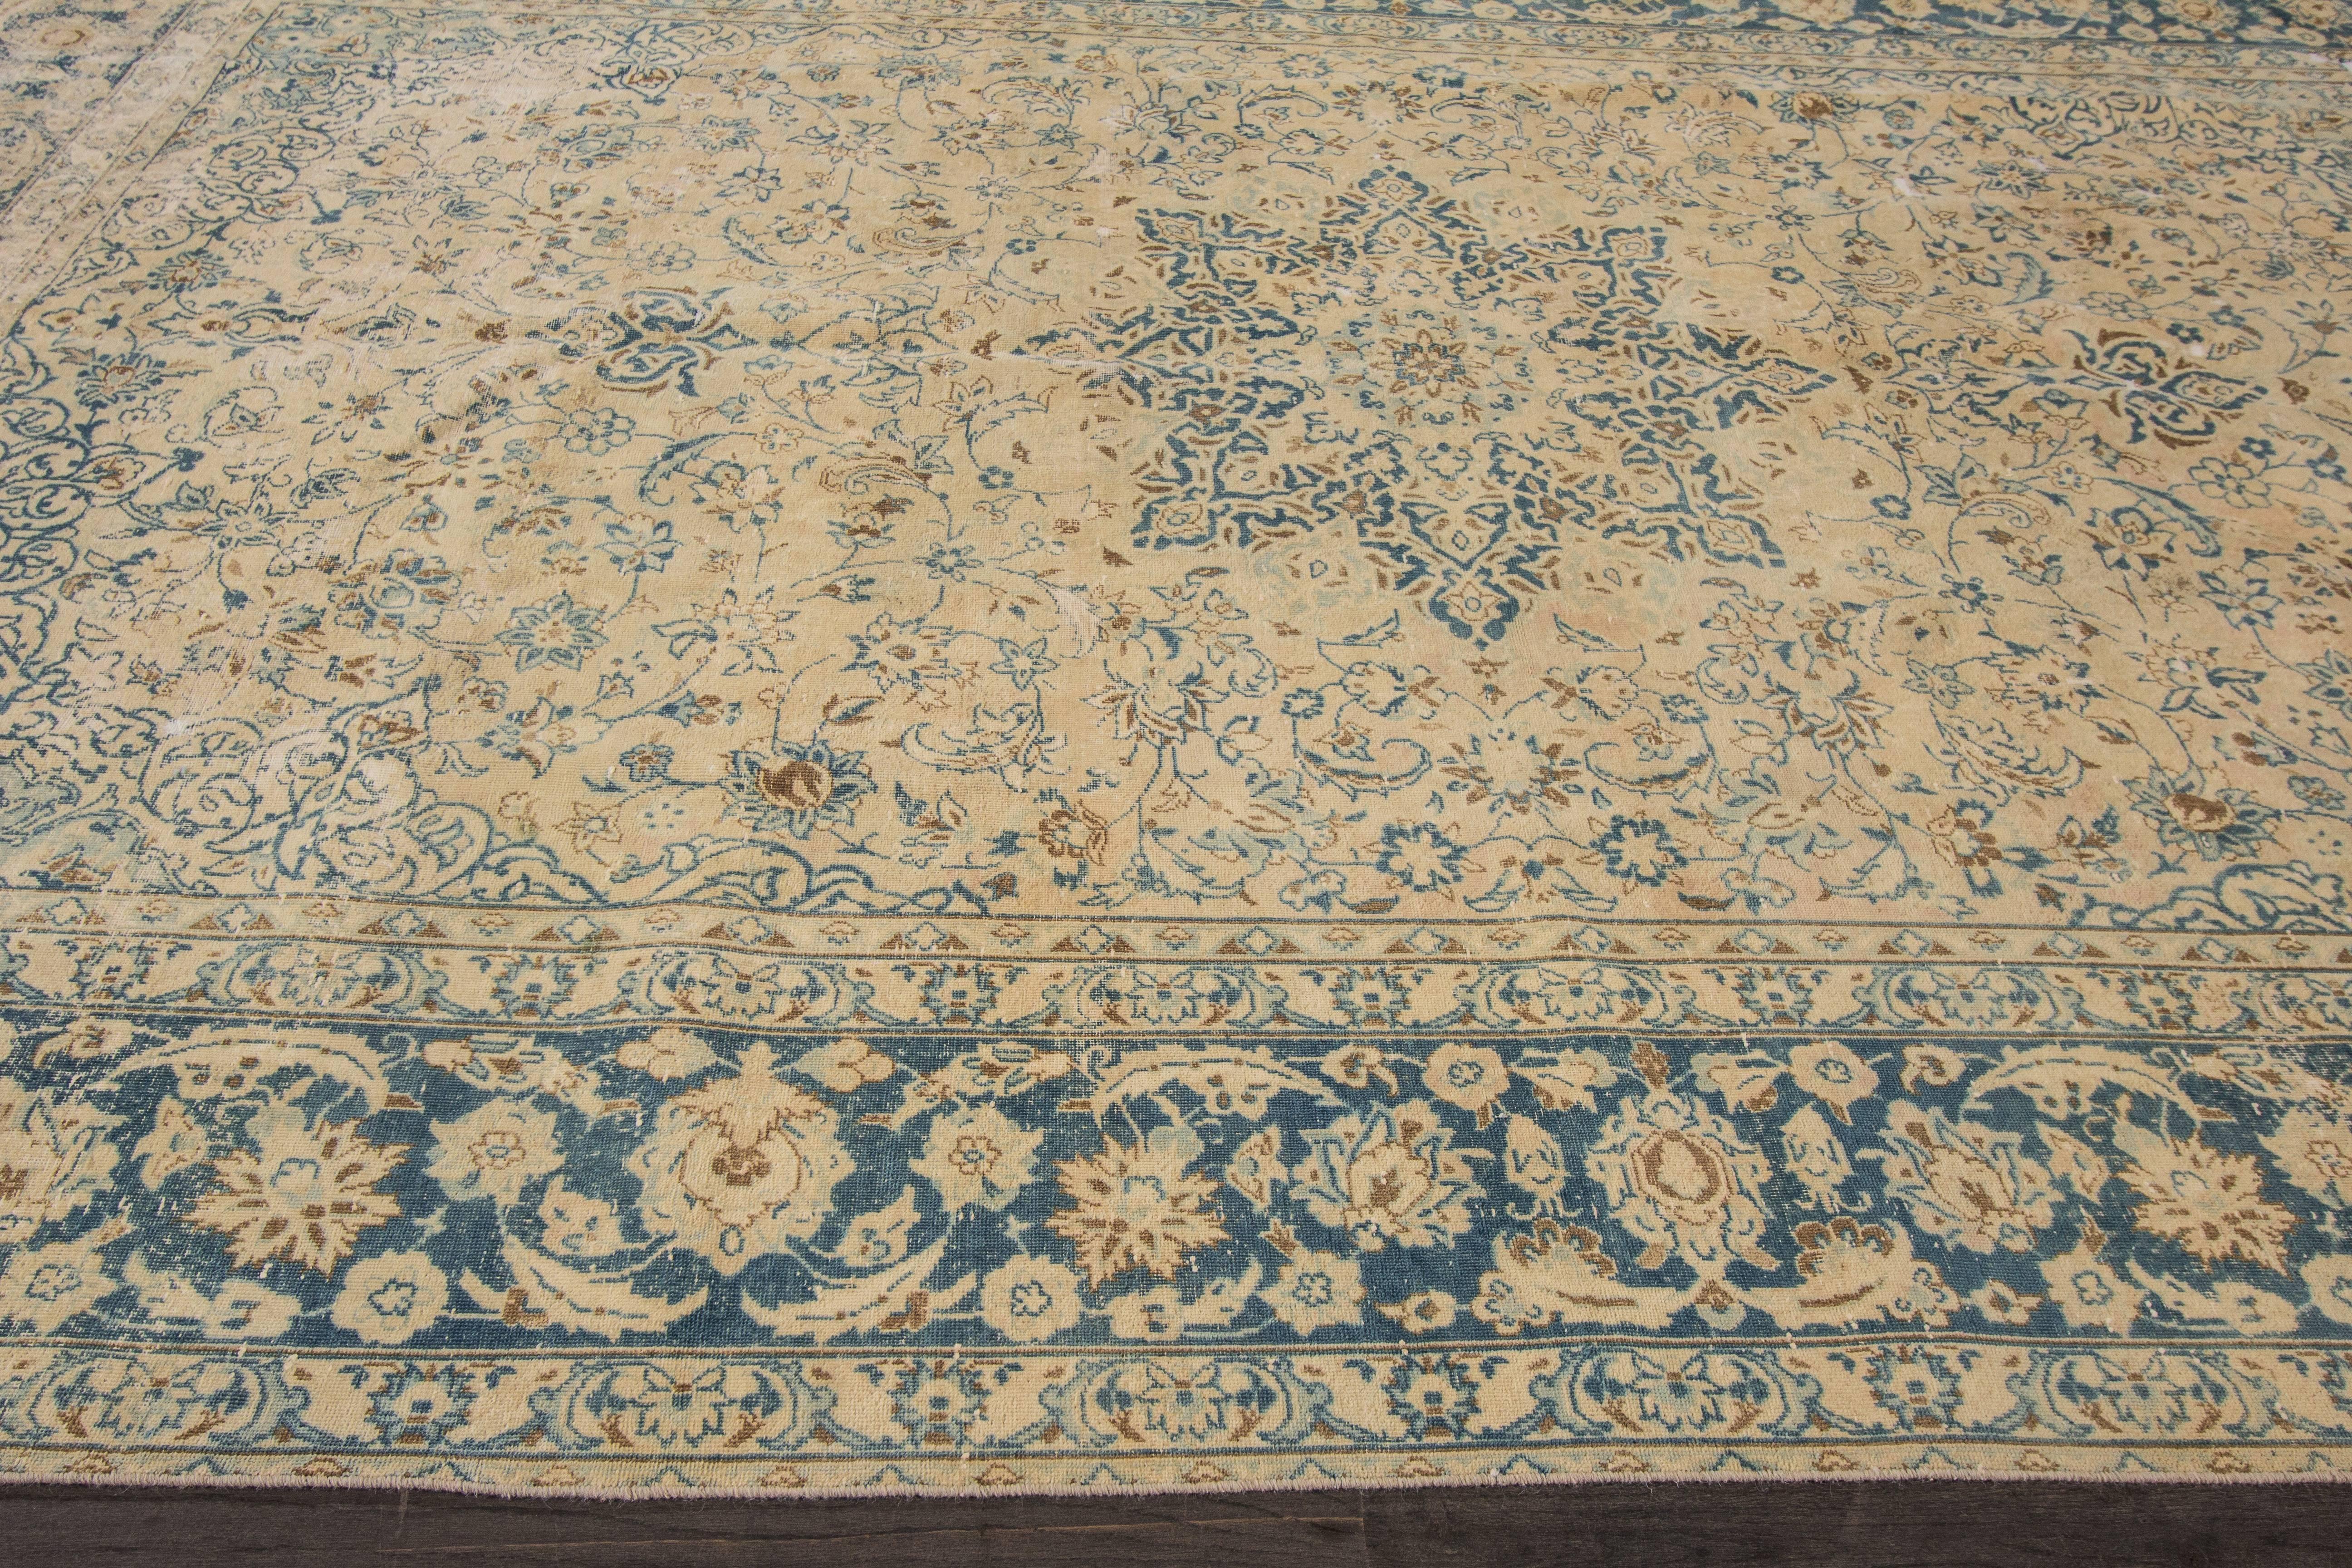 A hand-knotted vintage Persian Tabriz rug with a floral medallion design on a beige field. Accents of blue, red and brown throughout the piece. The size of this rug is 9'.3 x 13'.7.